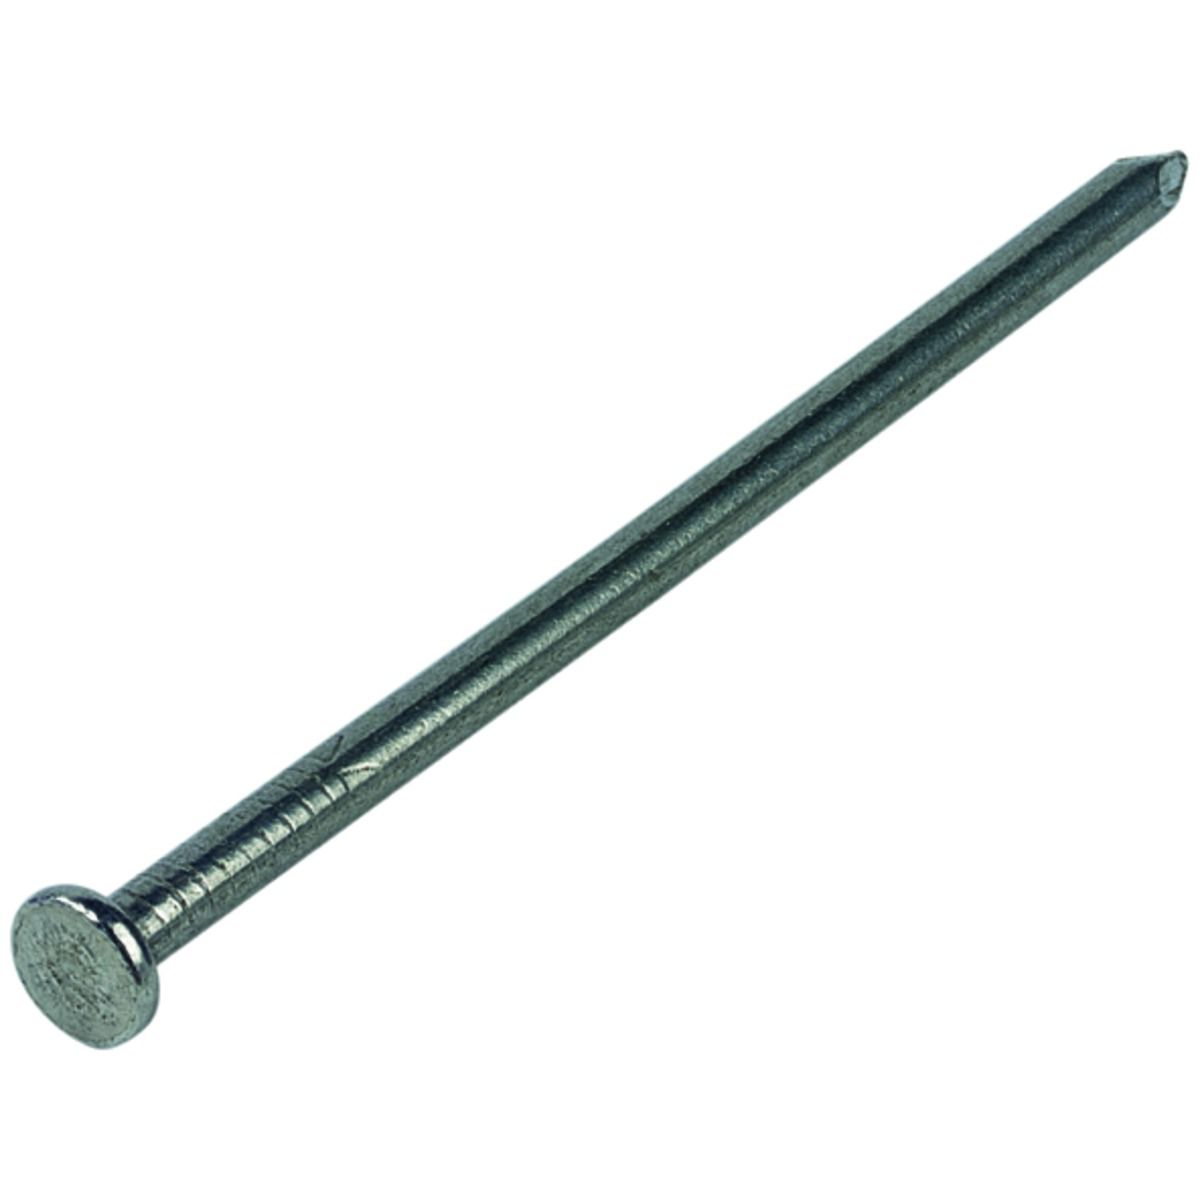 Image of Wickes 65mm Bright Round Wire Nails - 400g